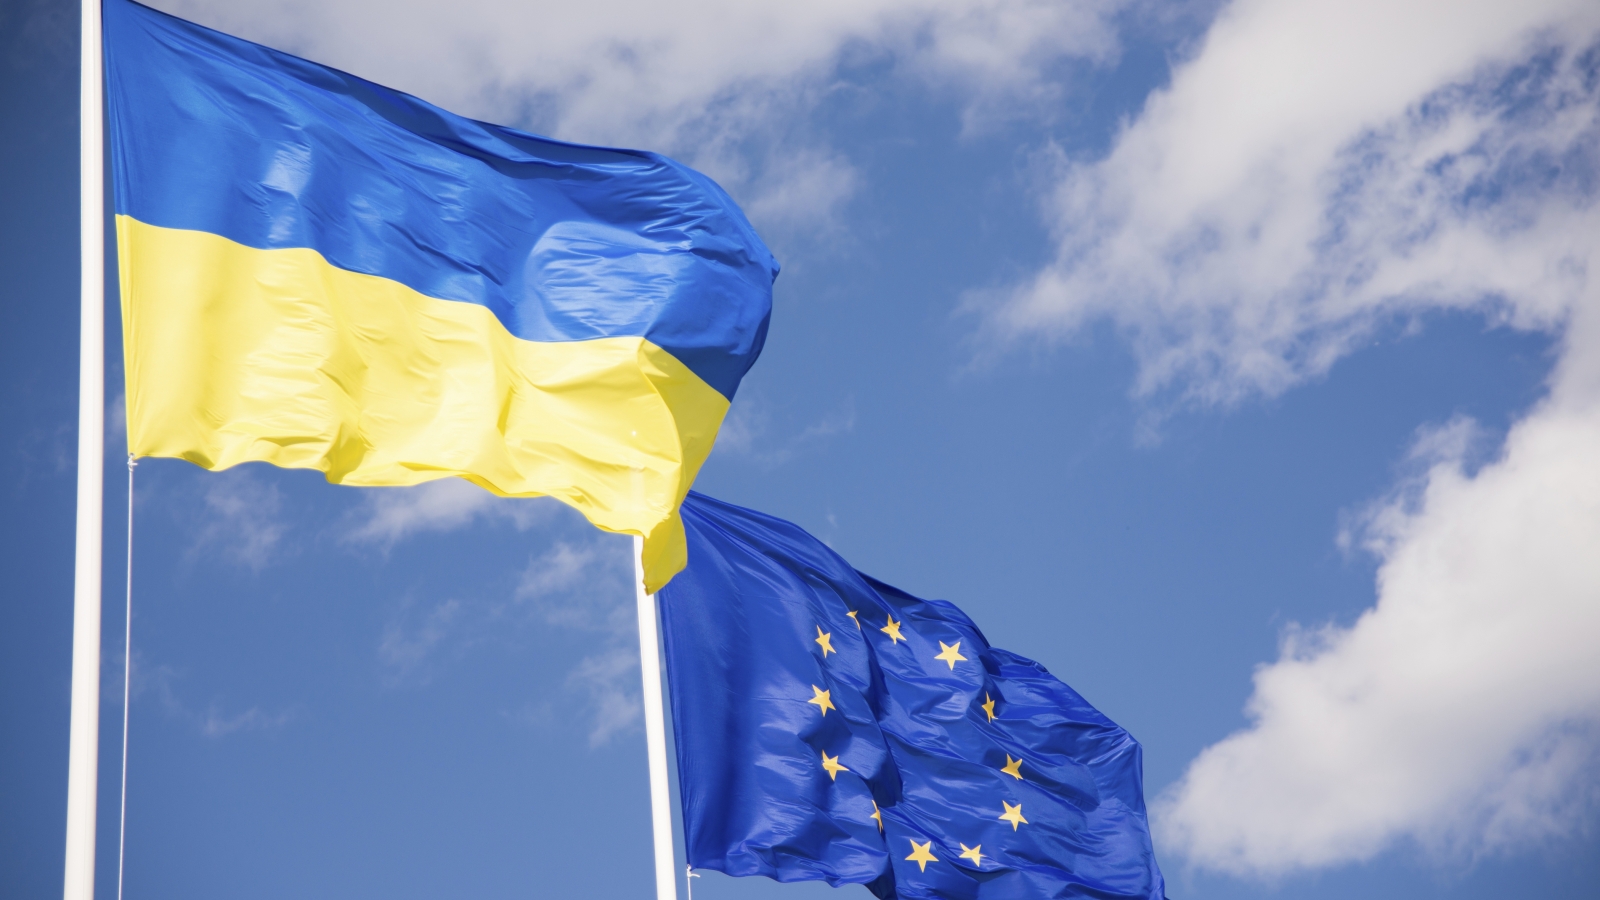 EU adds 3 persons and 3 companies to sanctions list over actions against Ukraine’s territorial integrity